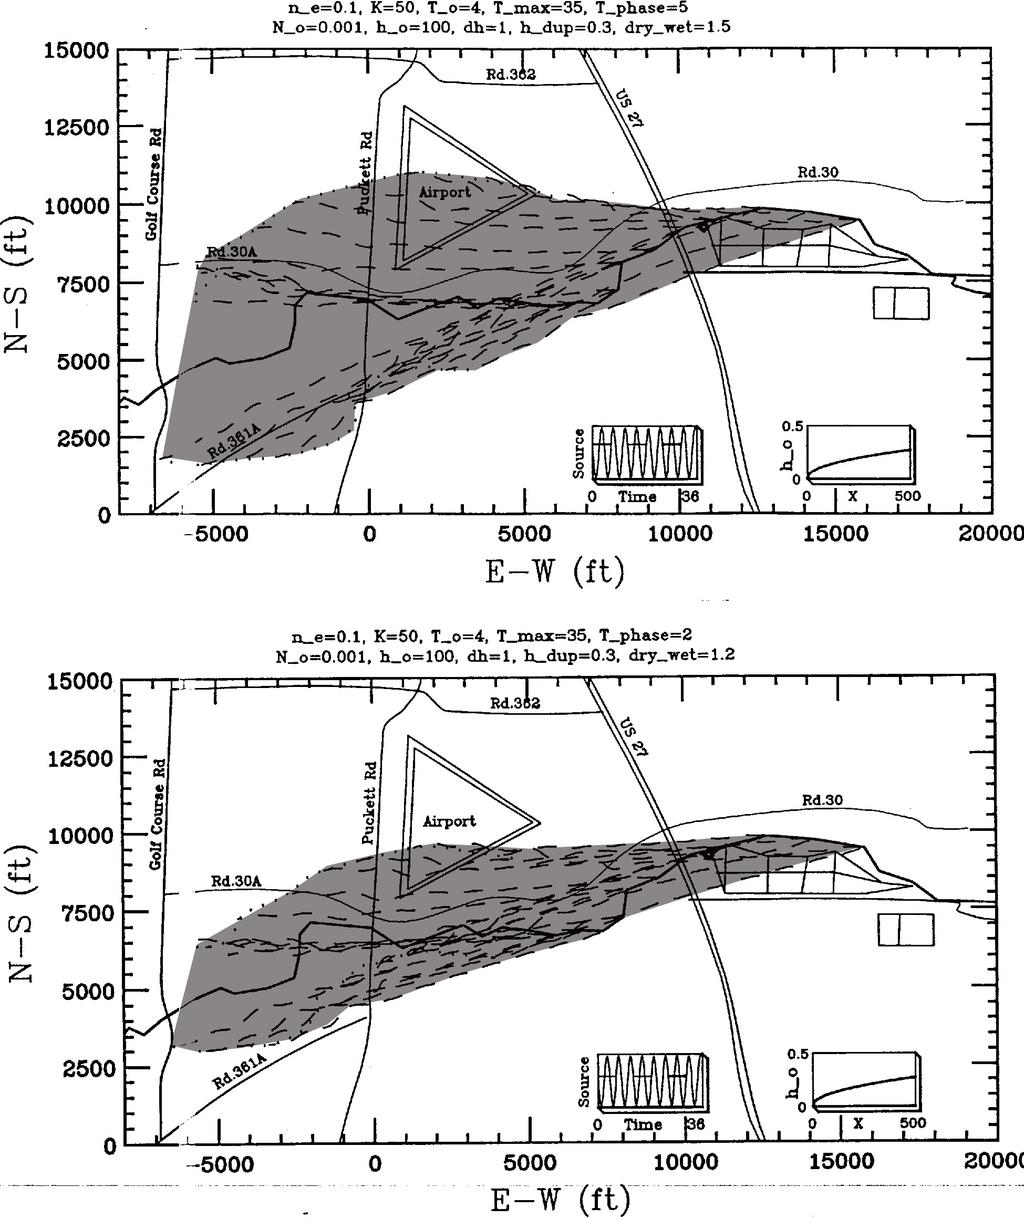 Fig. 12: Results of dynamic particle tracking over a total integration time of 35 years, a recurrence period of T 0 =1000 days, and hydraulic conductivity of K=50 m/day.